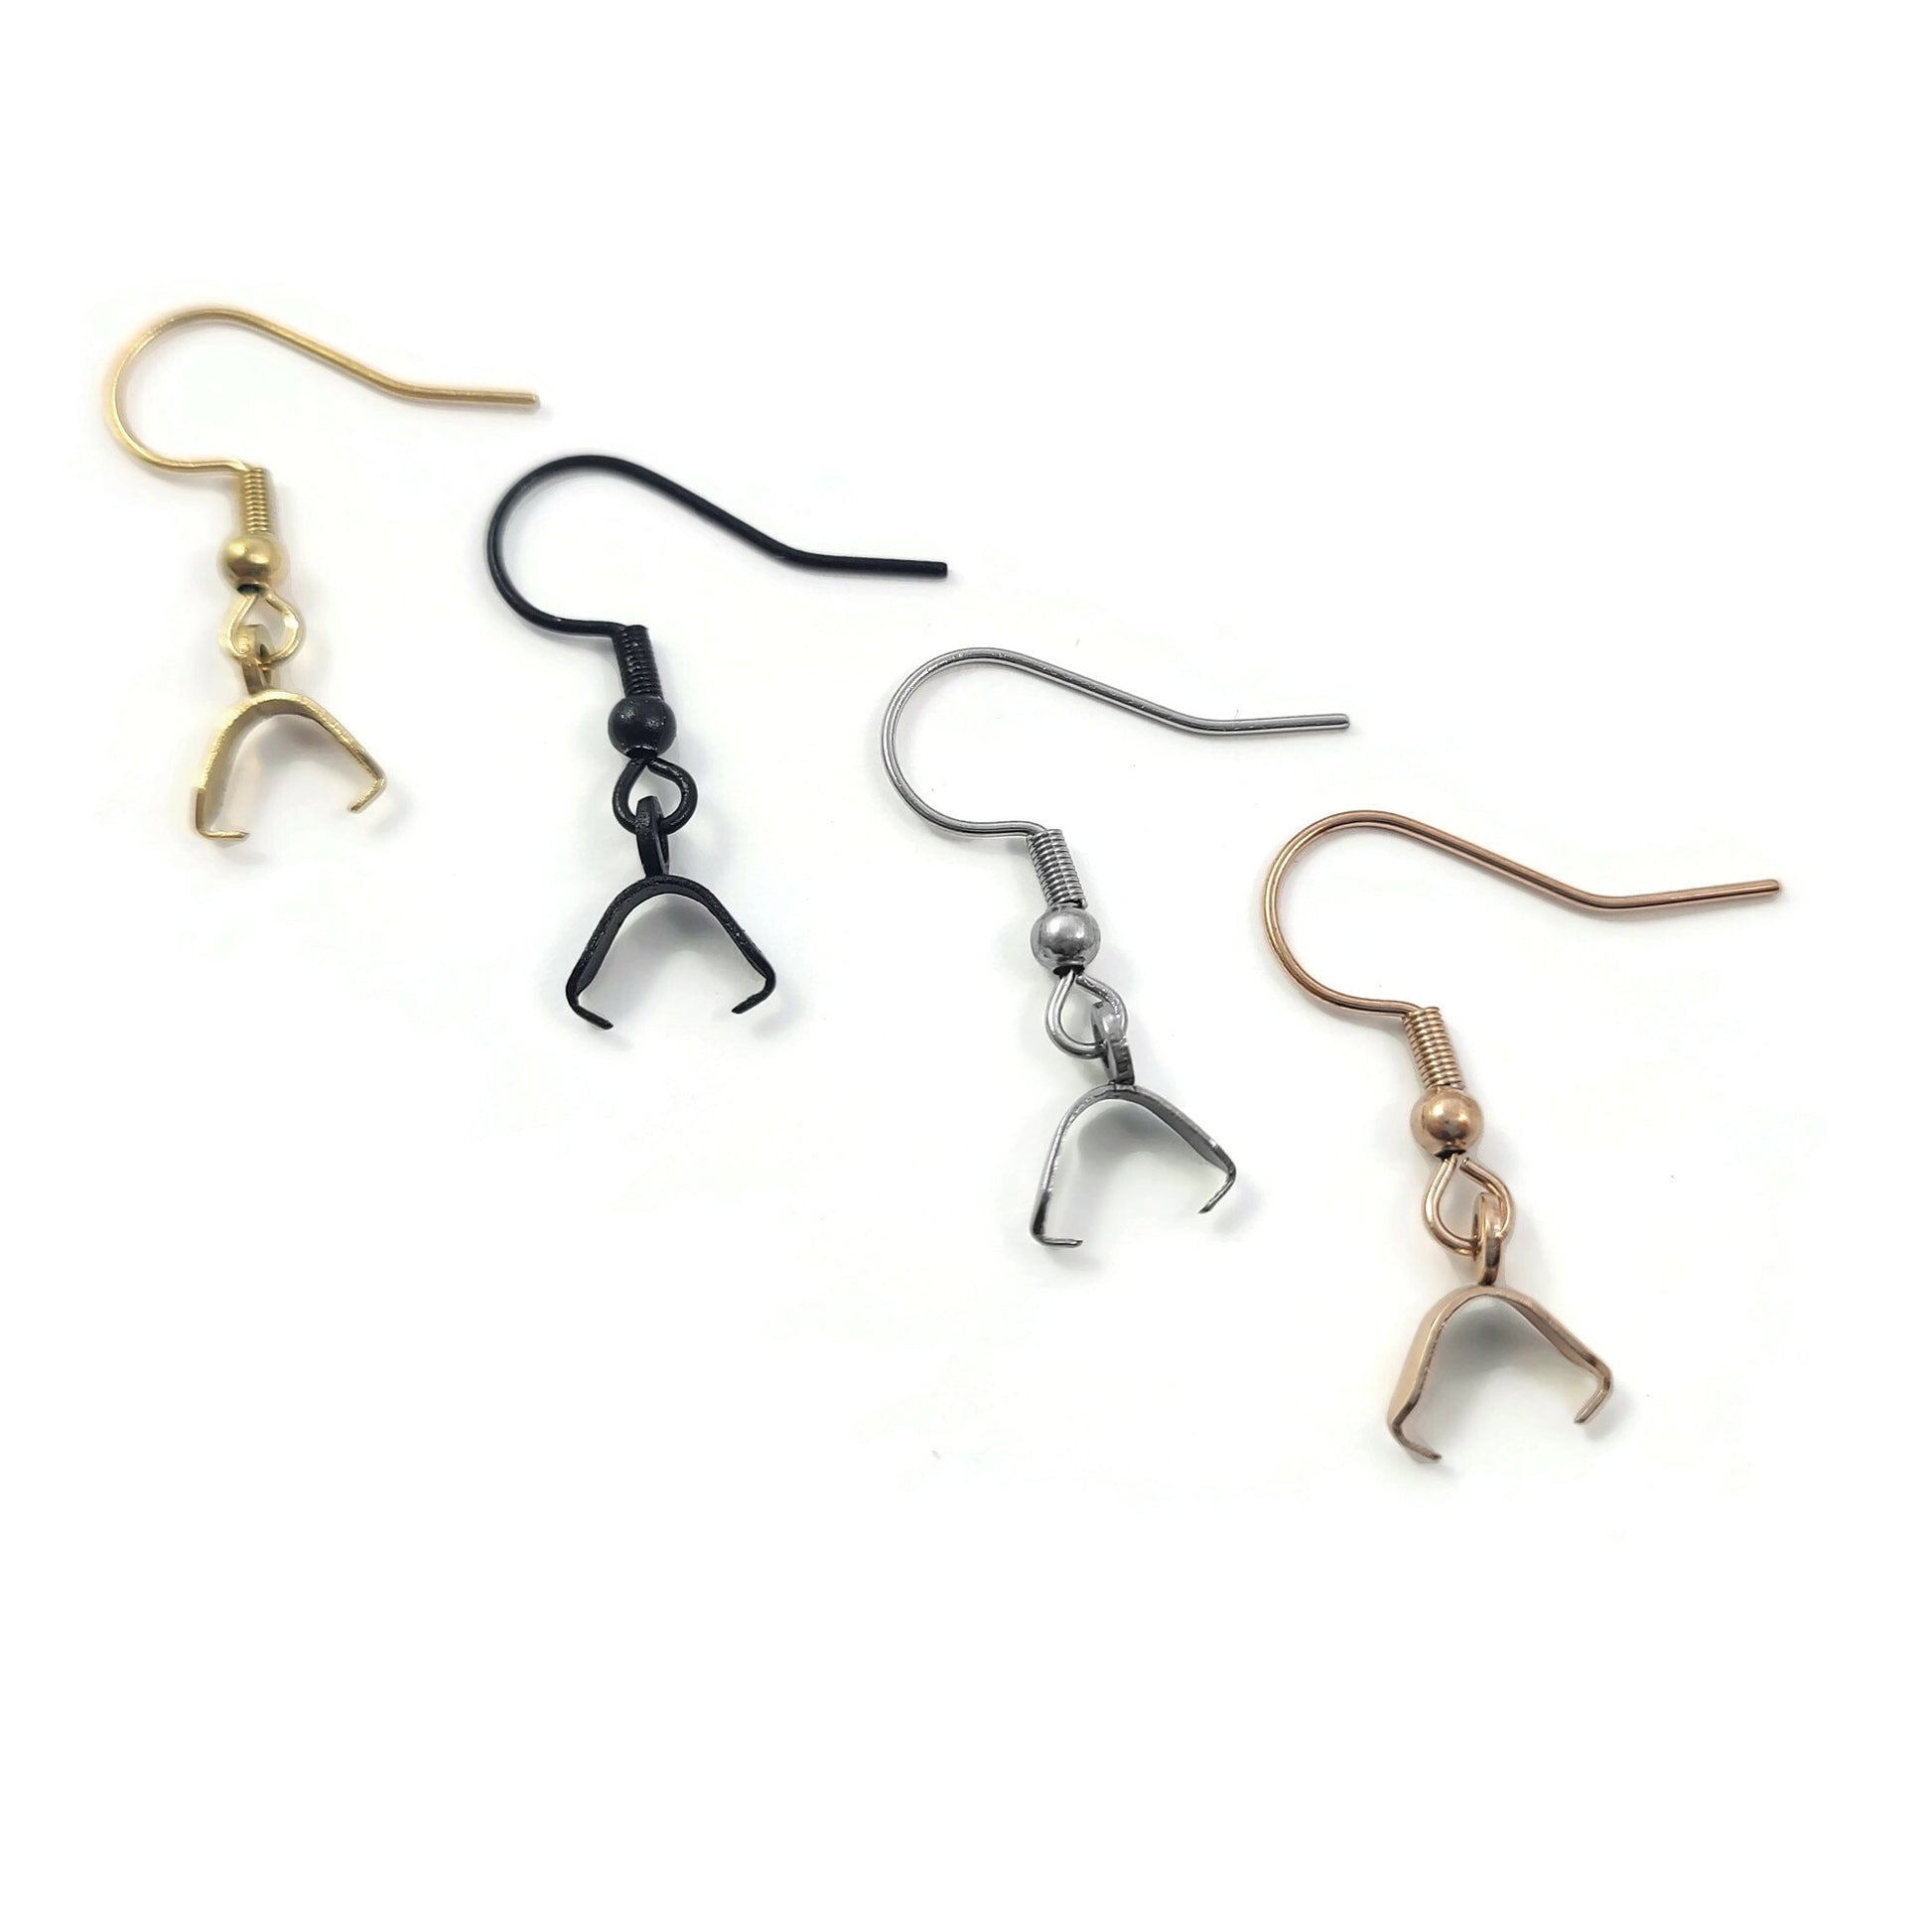 10pcs stainless steel earring hooks with pinch bails - Rose gold, gold, silver, black - Jewelry making findings